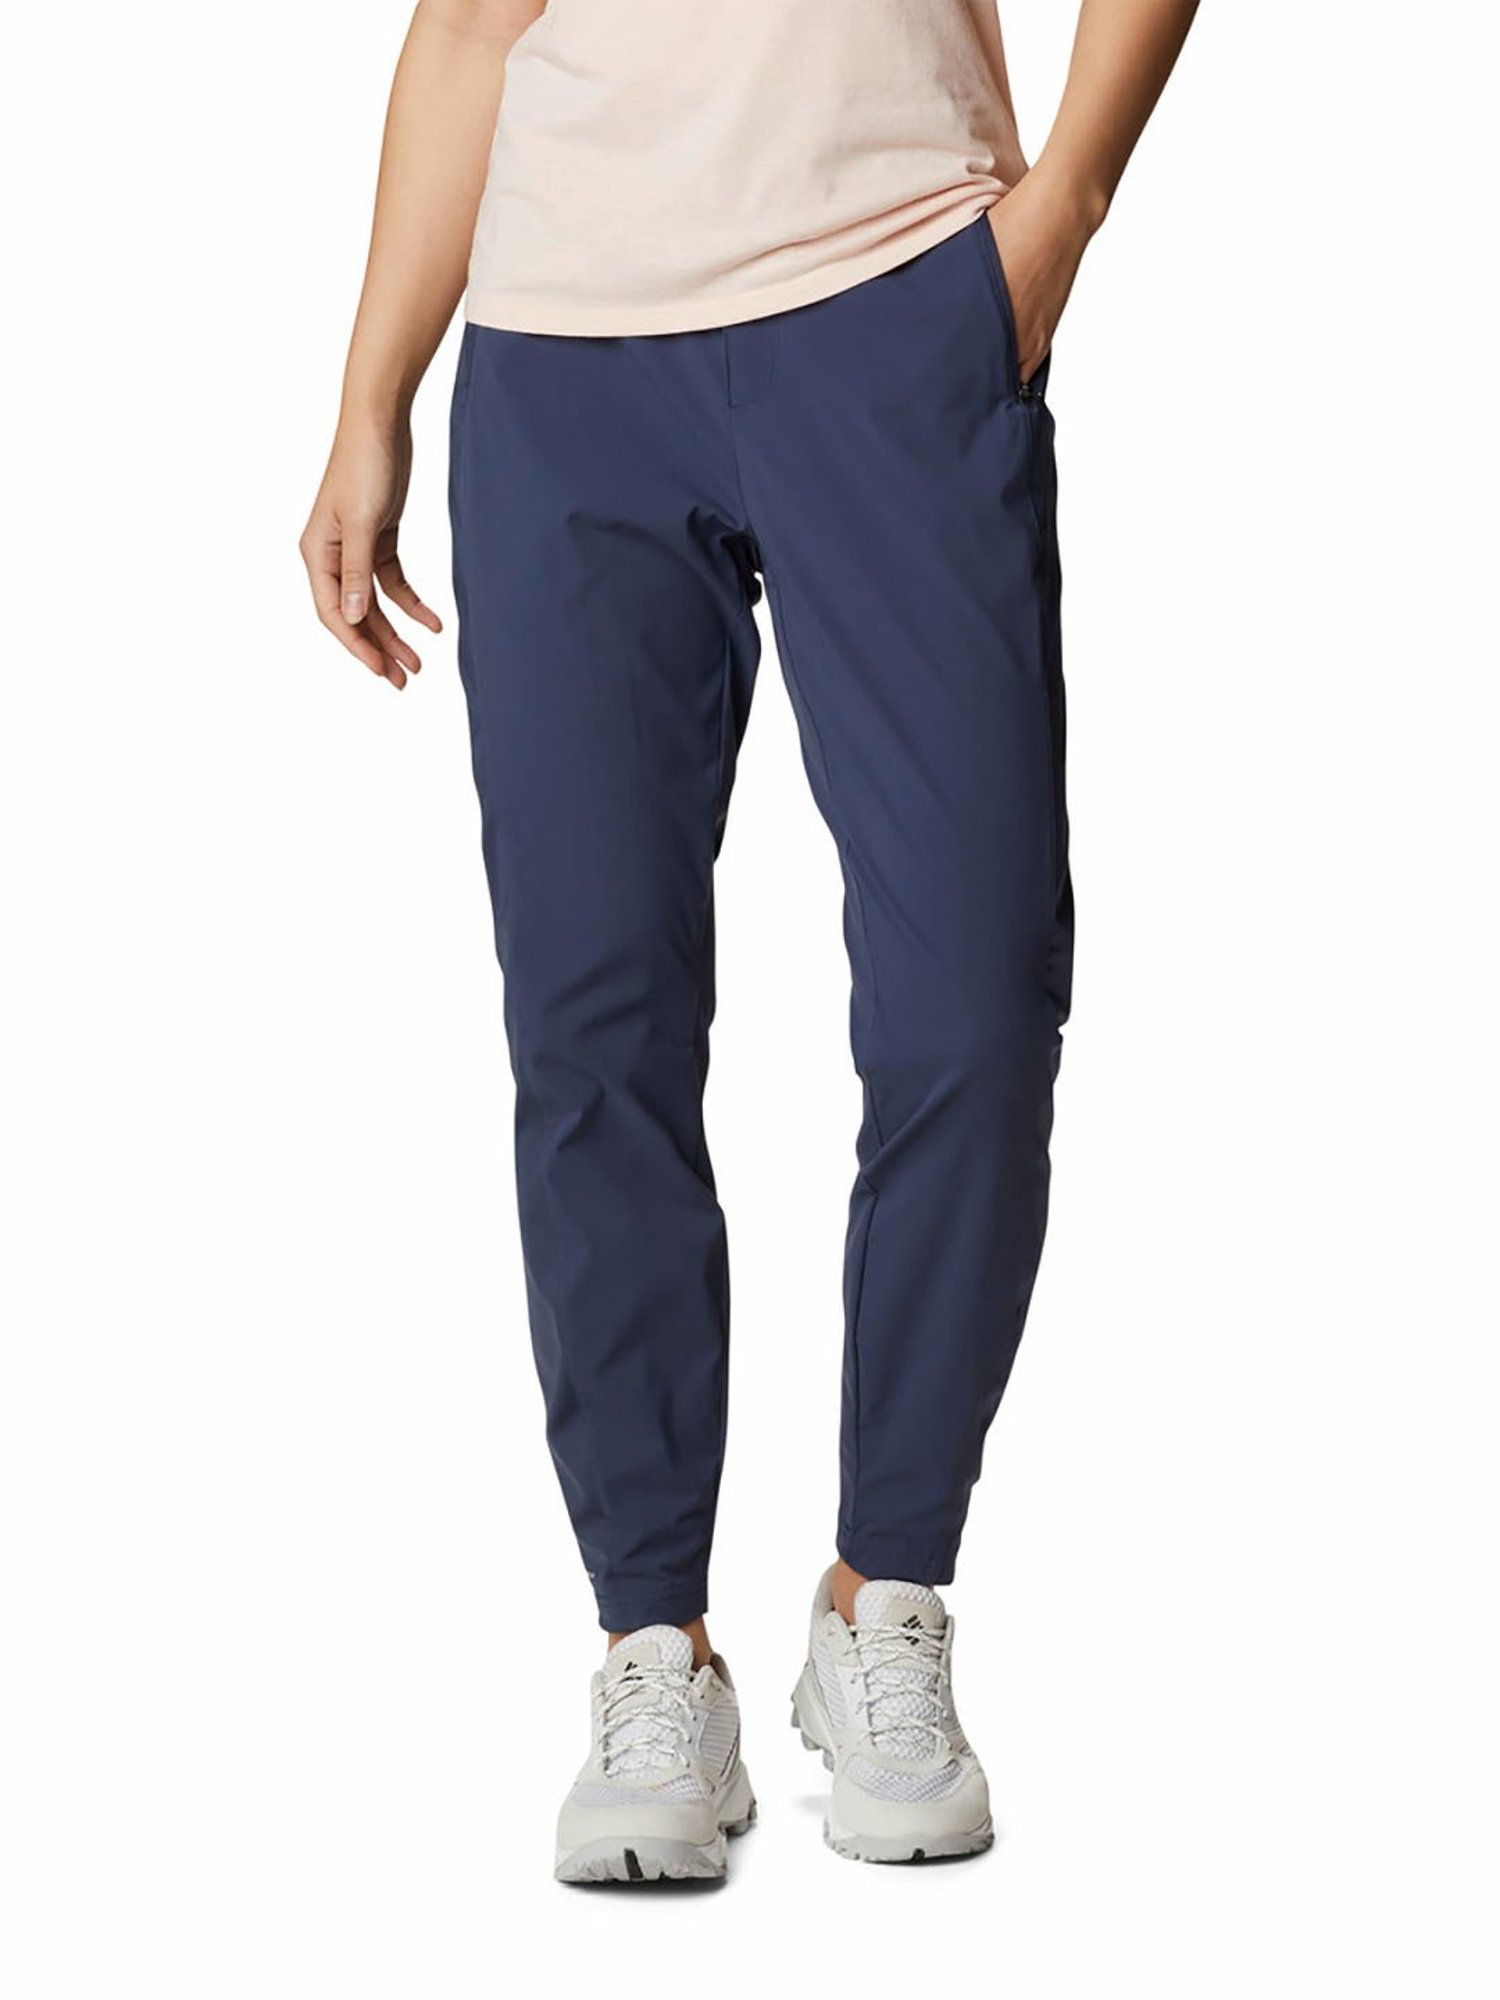 Buy Blue Trousers  Pants for Men by Columbia Online  Ajiocom